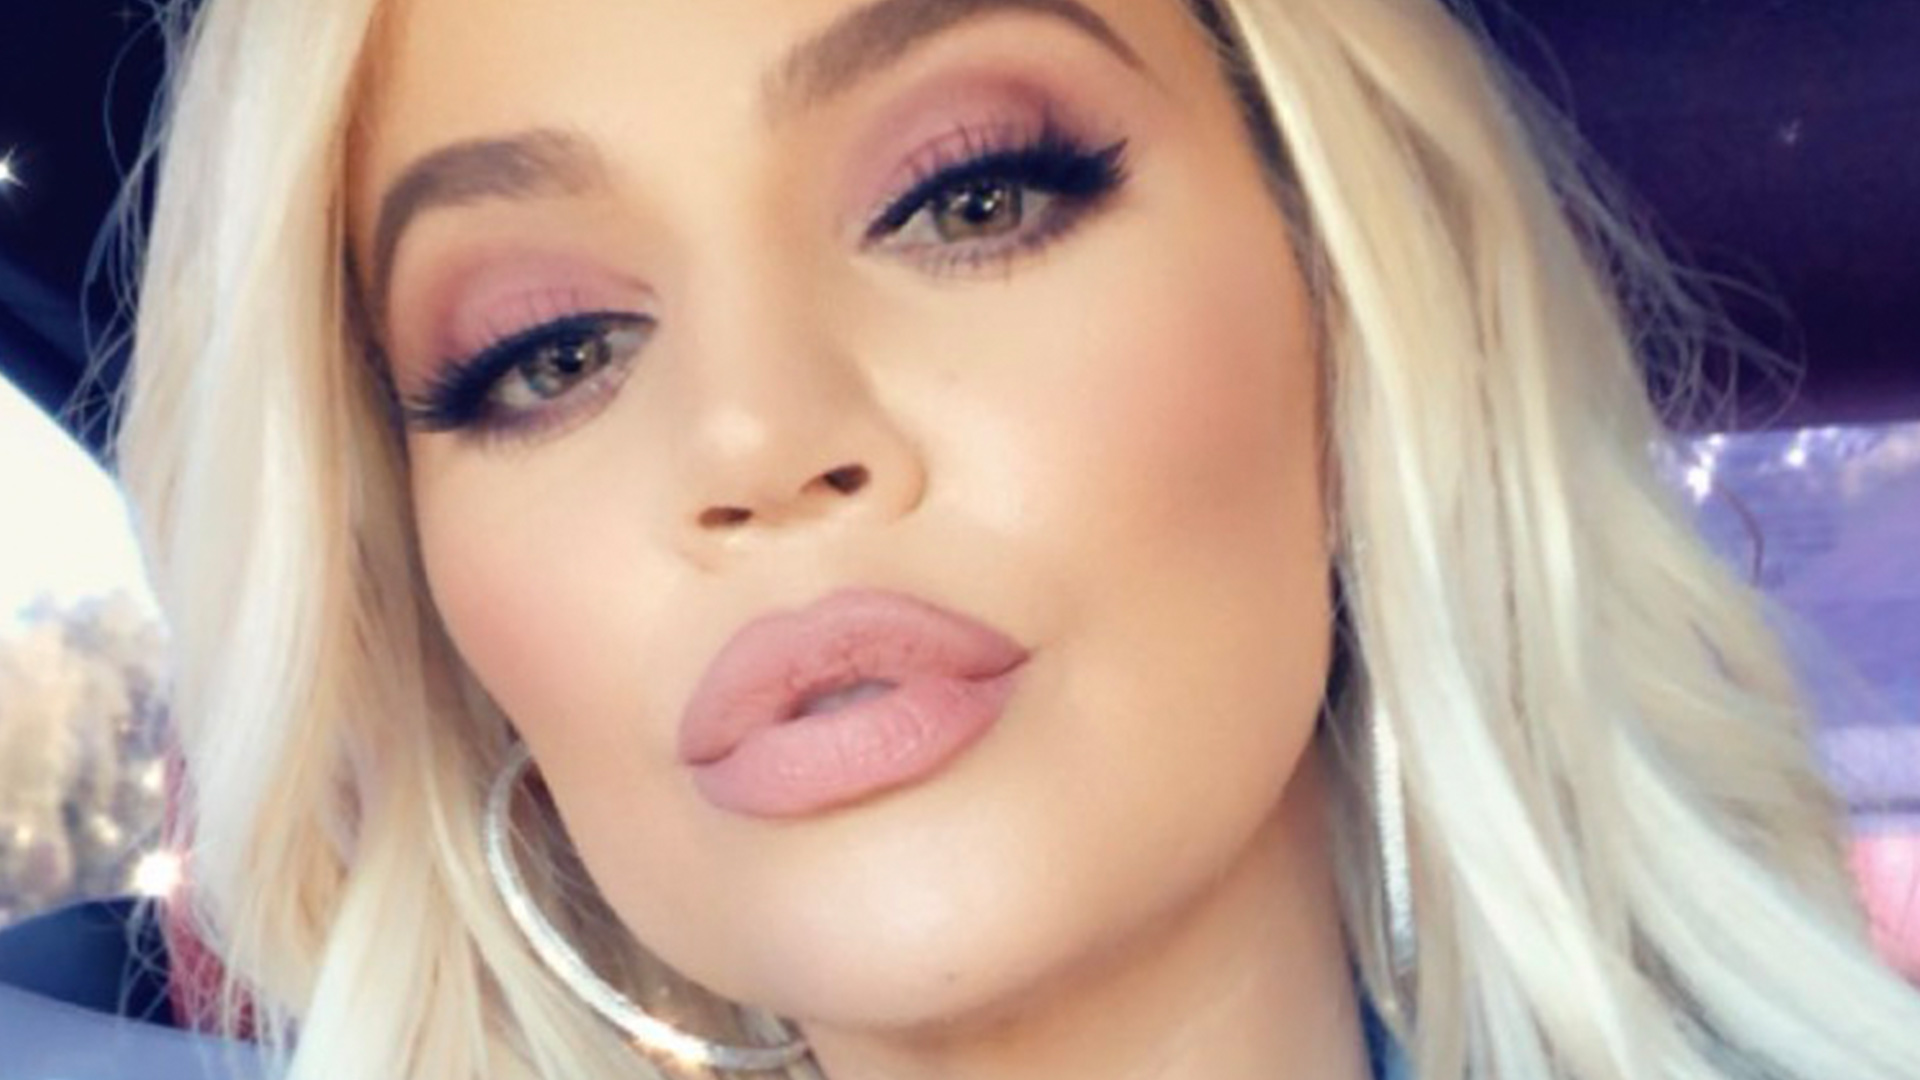 ‘Who is this?’ Khloe Kardashian fans ask about her unrecognizable face in car selfies and say she looks like Lady Gaga